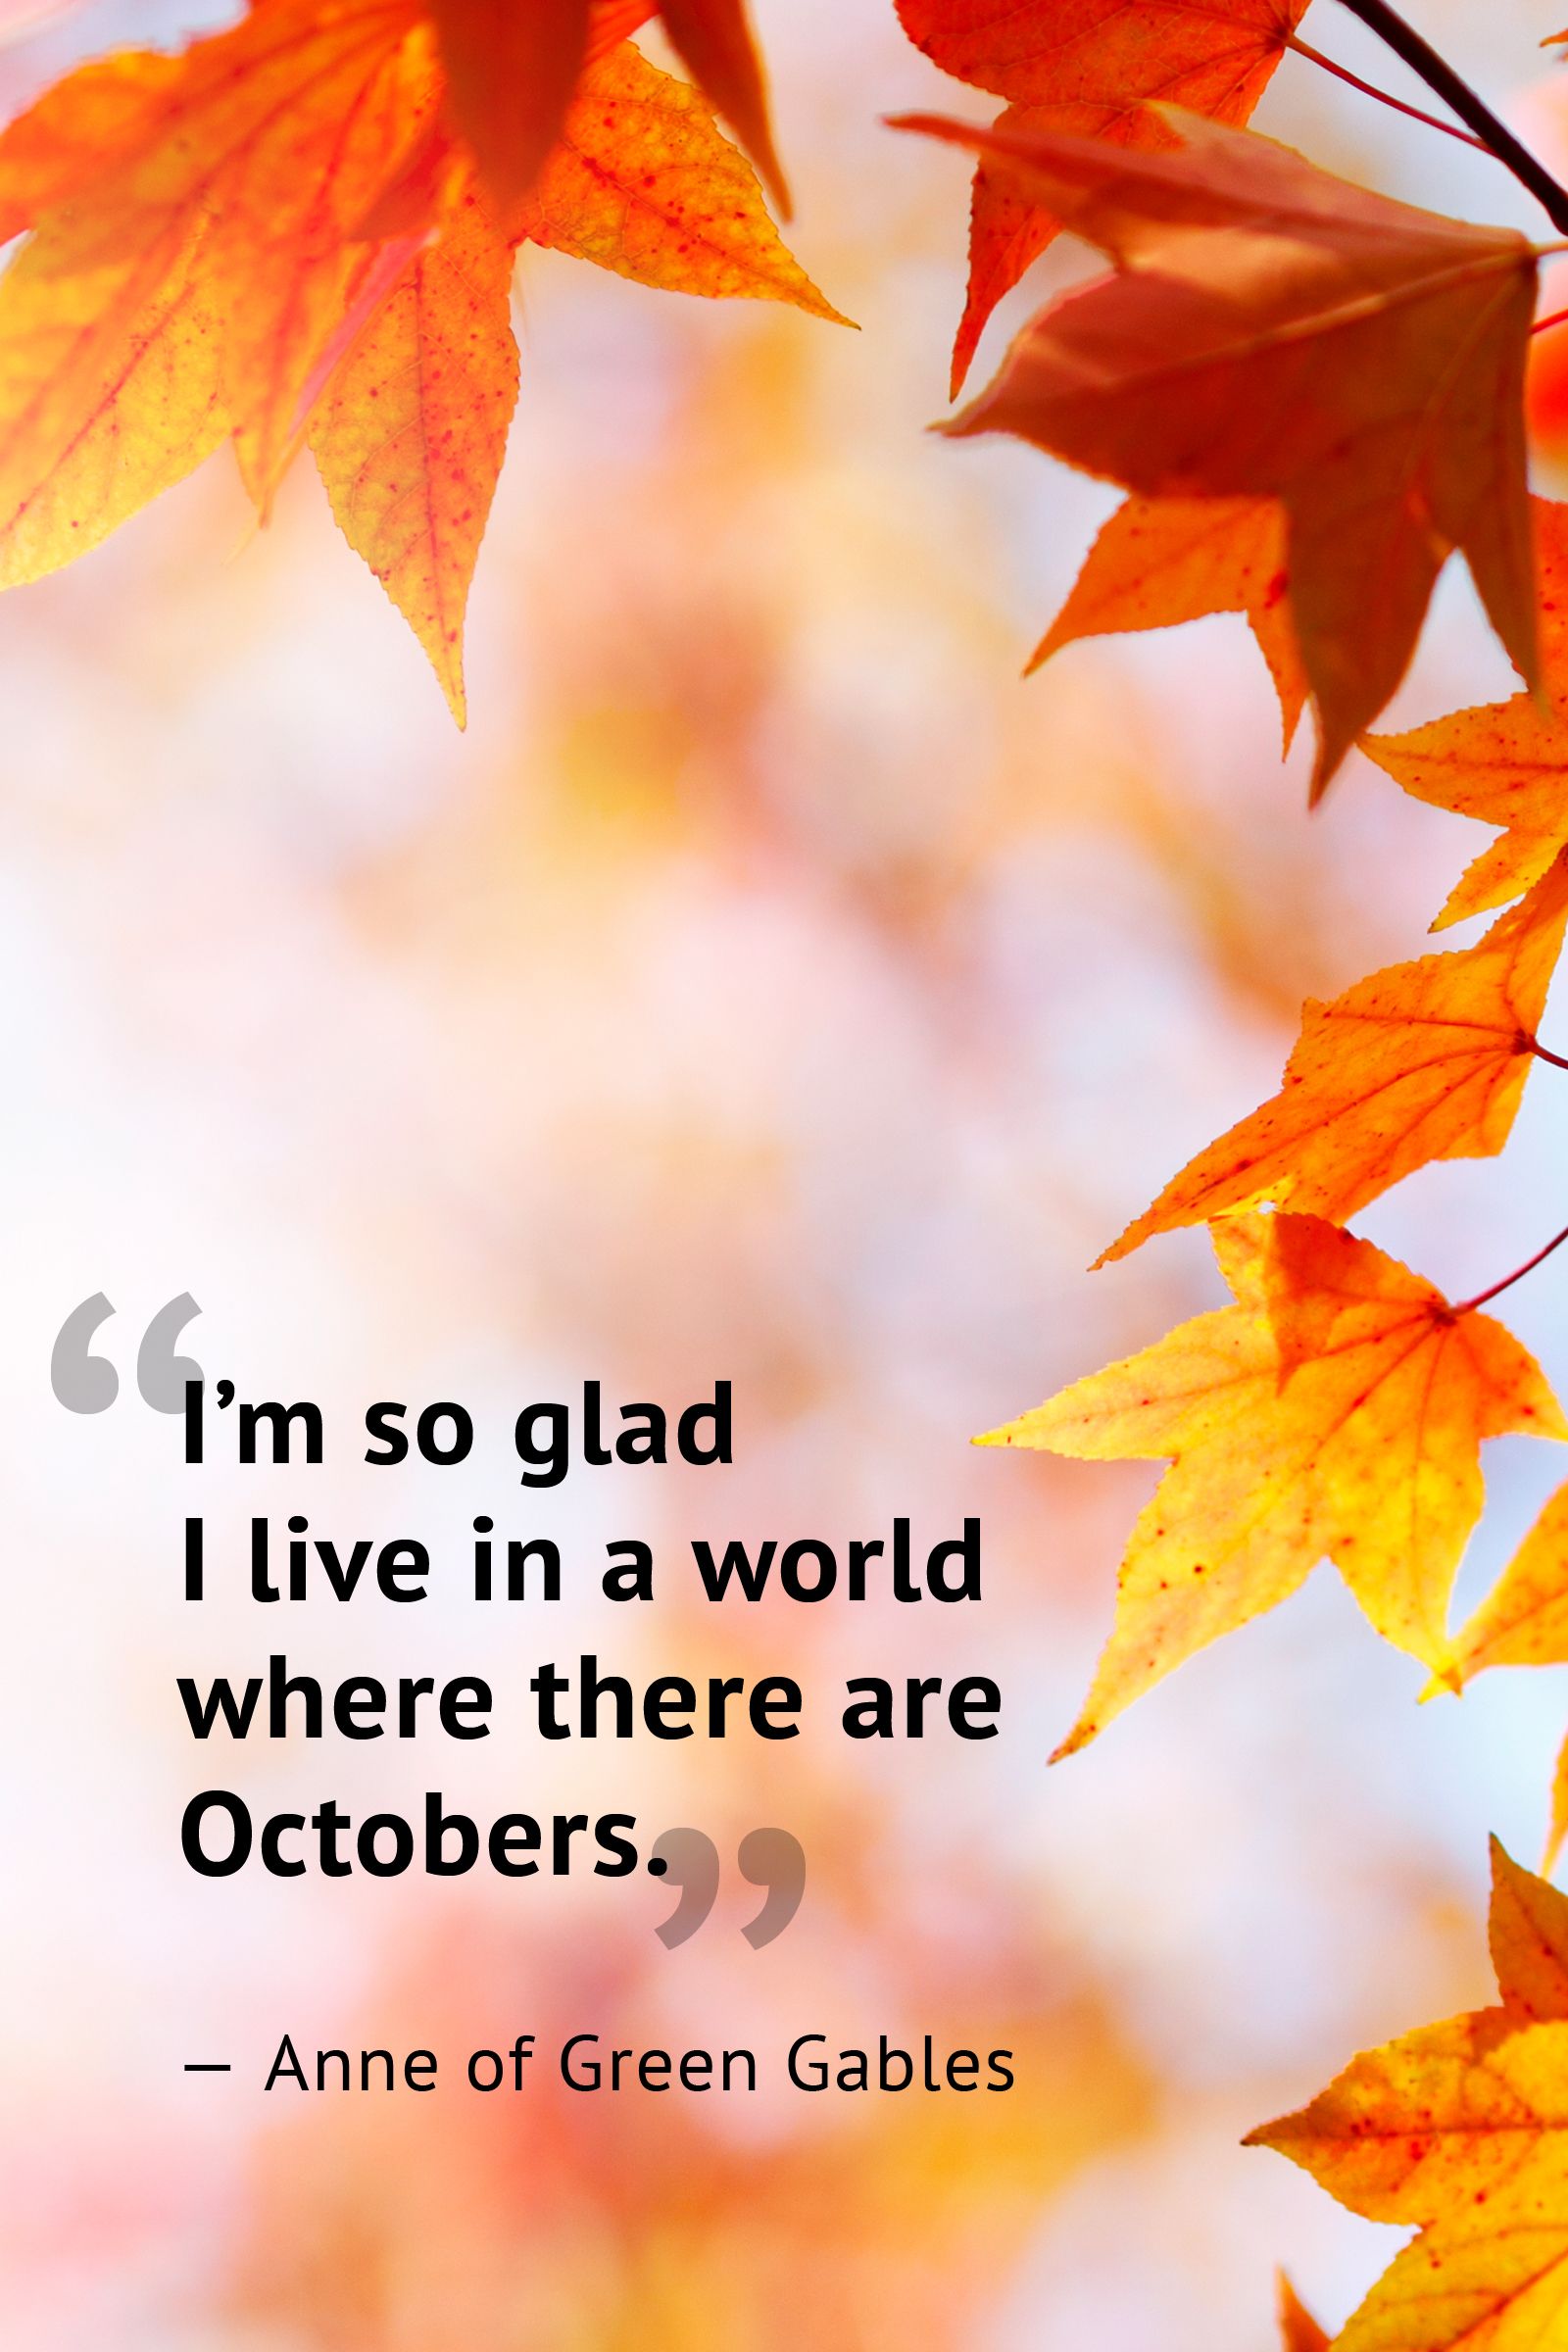 early autumn quotes